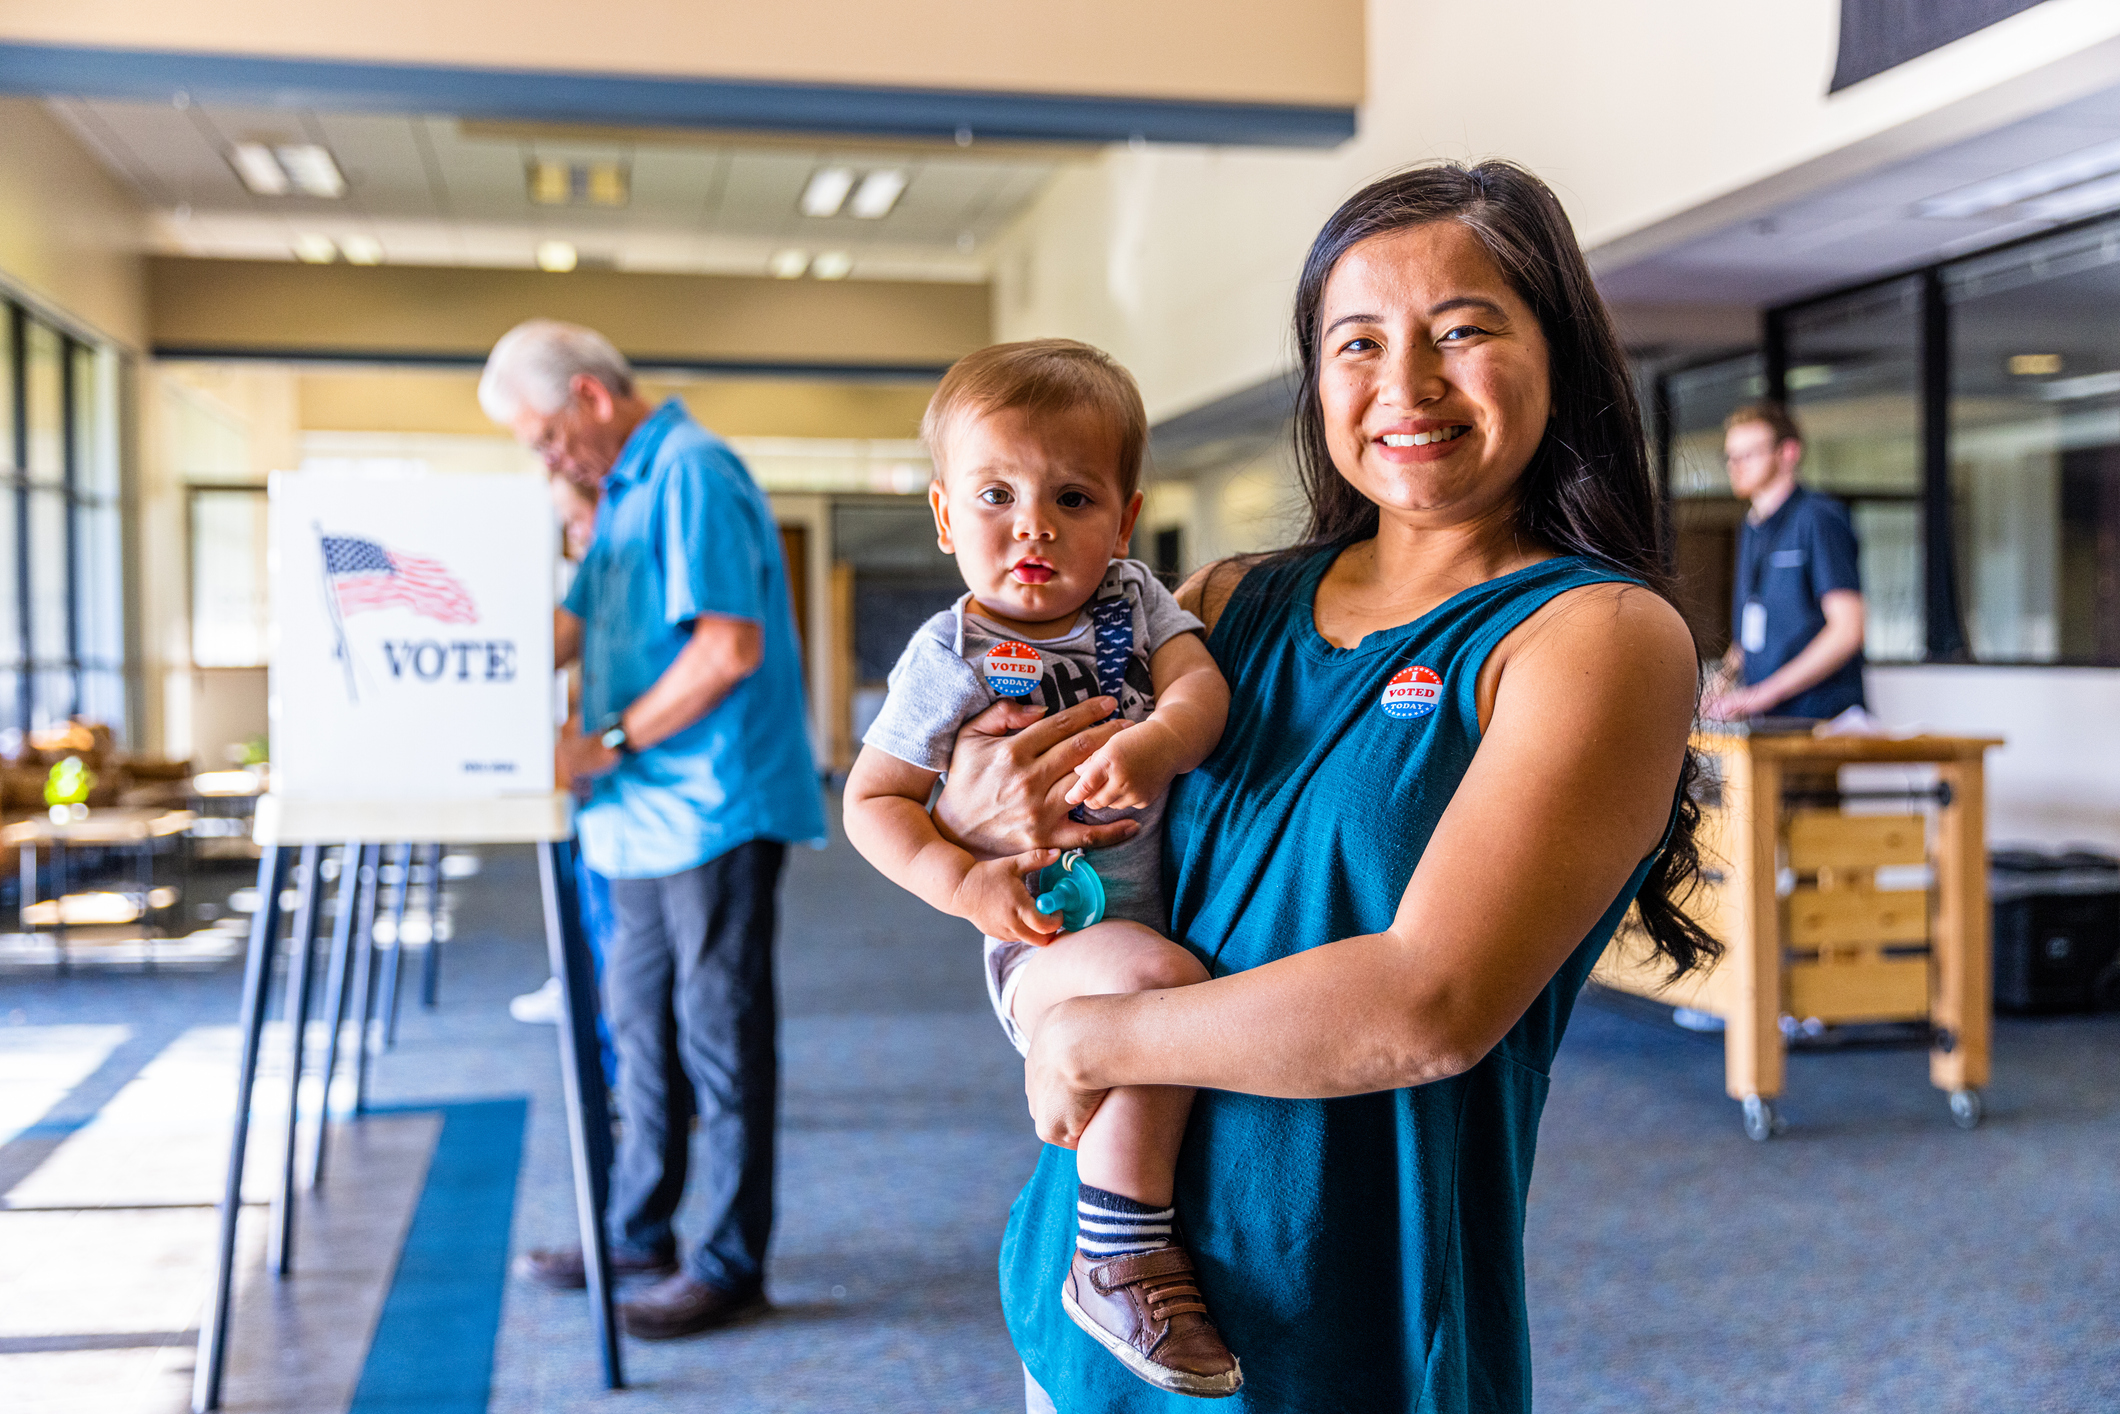 Filipino Woman And Her Baby Boy After Voting In An American Election